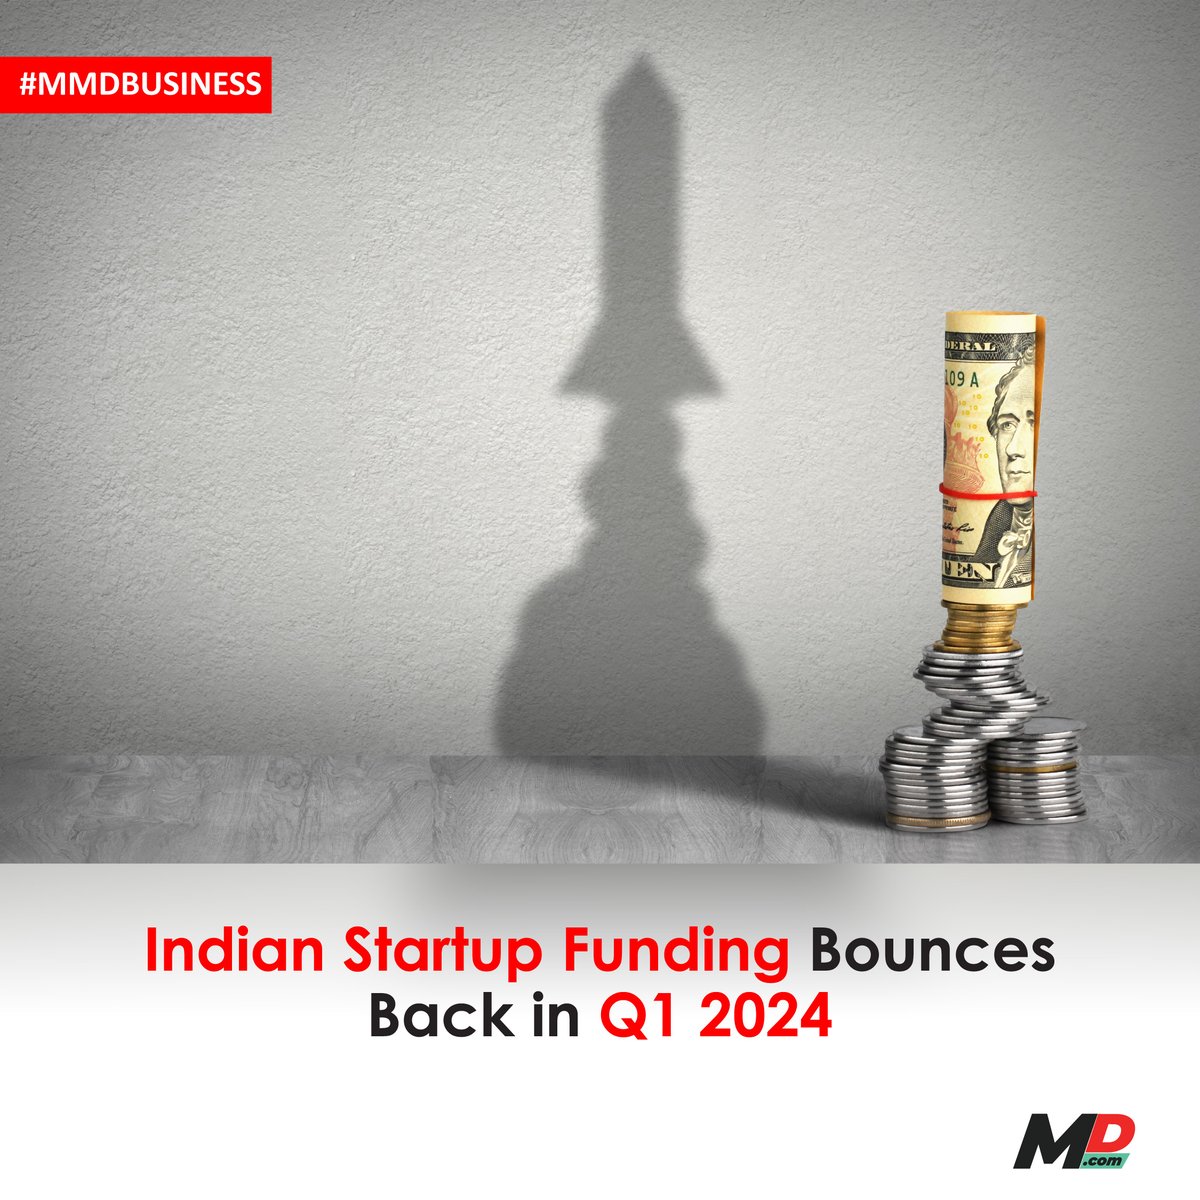 After a period of stagnation, the Indian startup ecosystem is witnessing a remarkable resurgence in venture capital and private equity funding. Major funds, once hesitant, are now re-entering the scene with renewed confidence, signaling a promising future for startups. For one,…